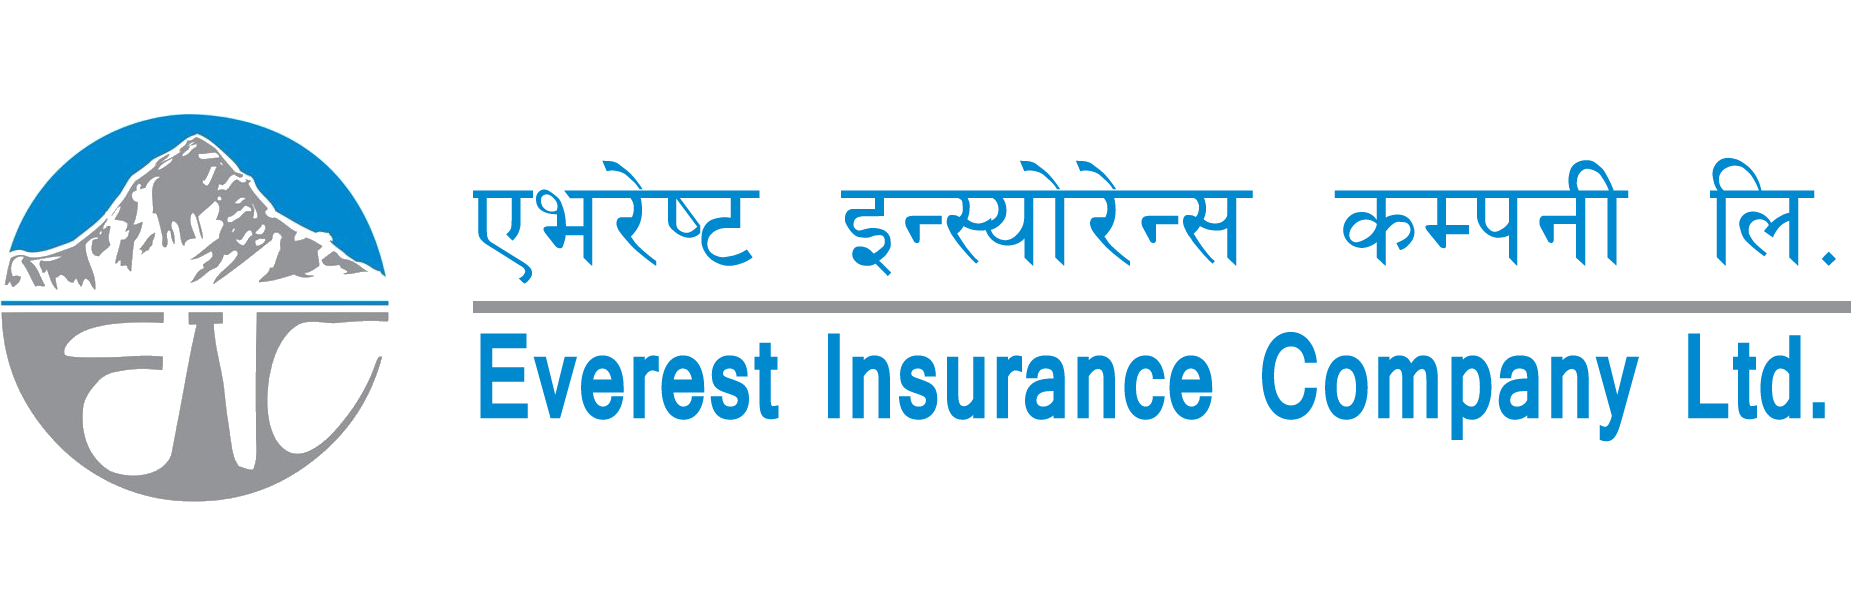 Everest Insurance shows net profit of 3.34 crore in 3rd quarter; EPS stands at 30.27